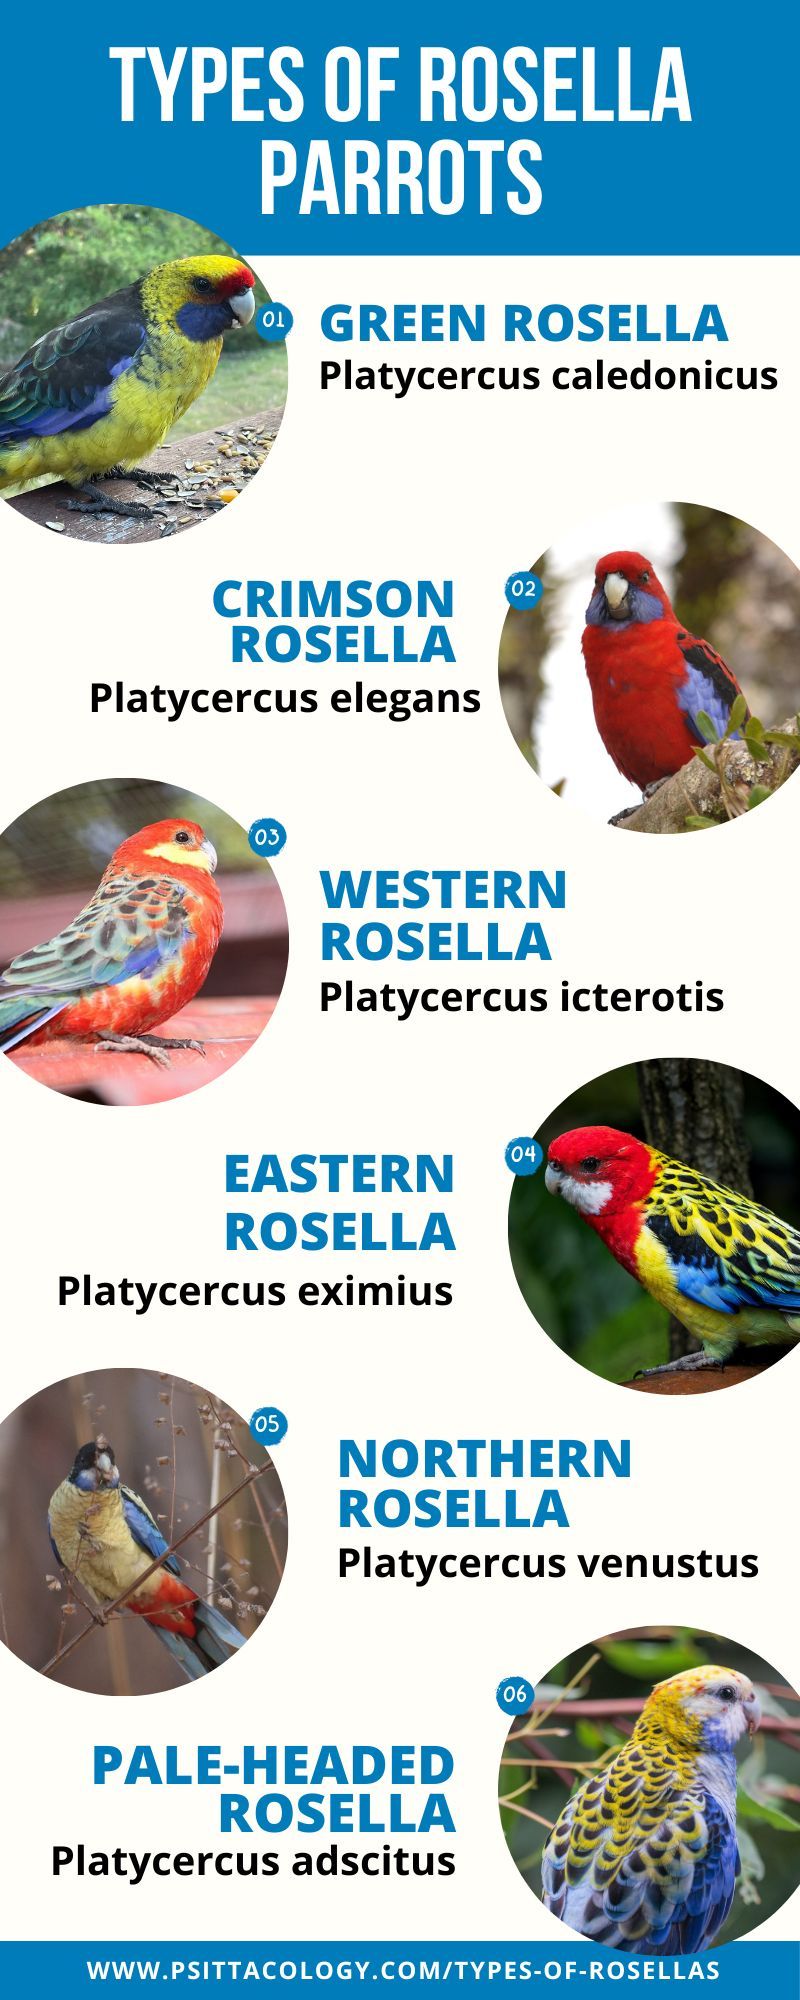 Infographic with photos showing the 6 different types of rosellas (parrots of the genus Platycercus)